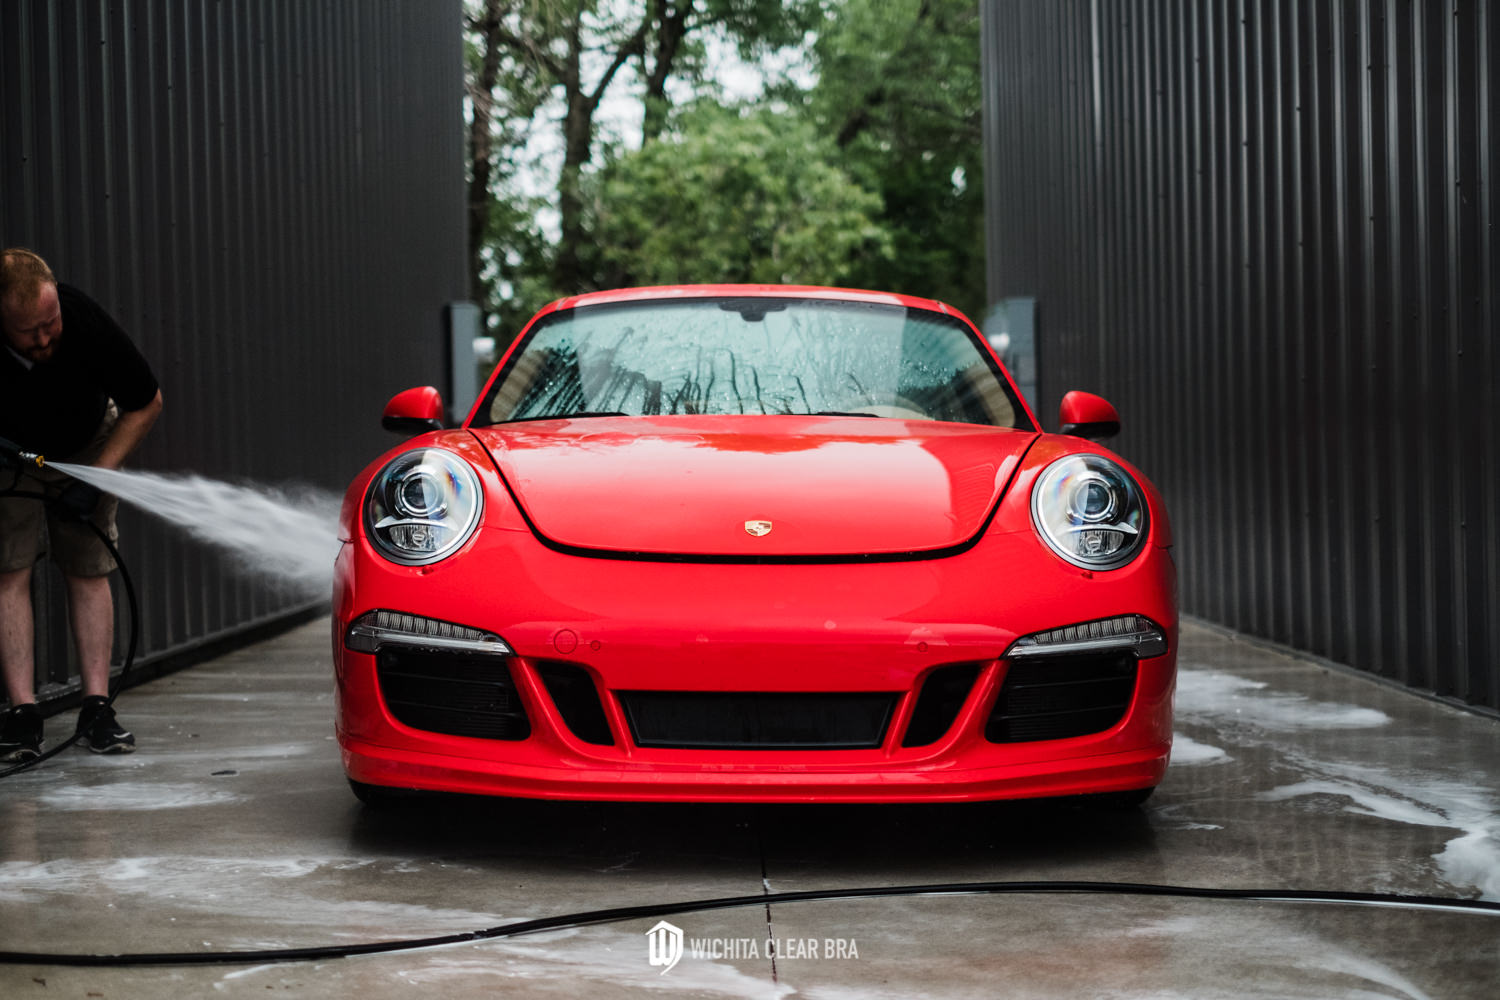 Wichita Clear Bra - Porsche 911 - Forgeline Wheels CF201 - Carbon + Forged Series - XPEL PPF - Paint Protection - Modified Porsche 911 -  Ceramic Pro Coating-116.jpg